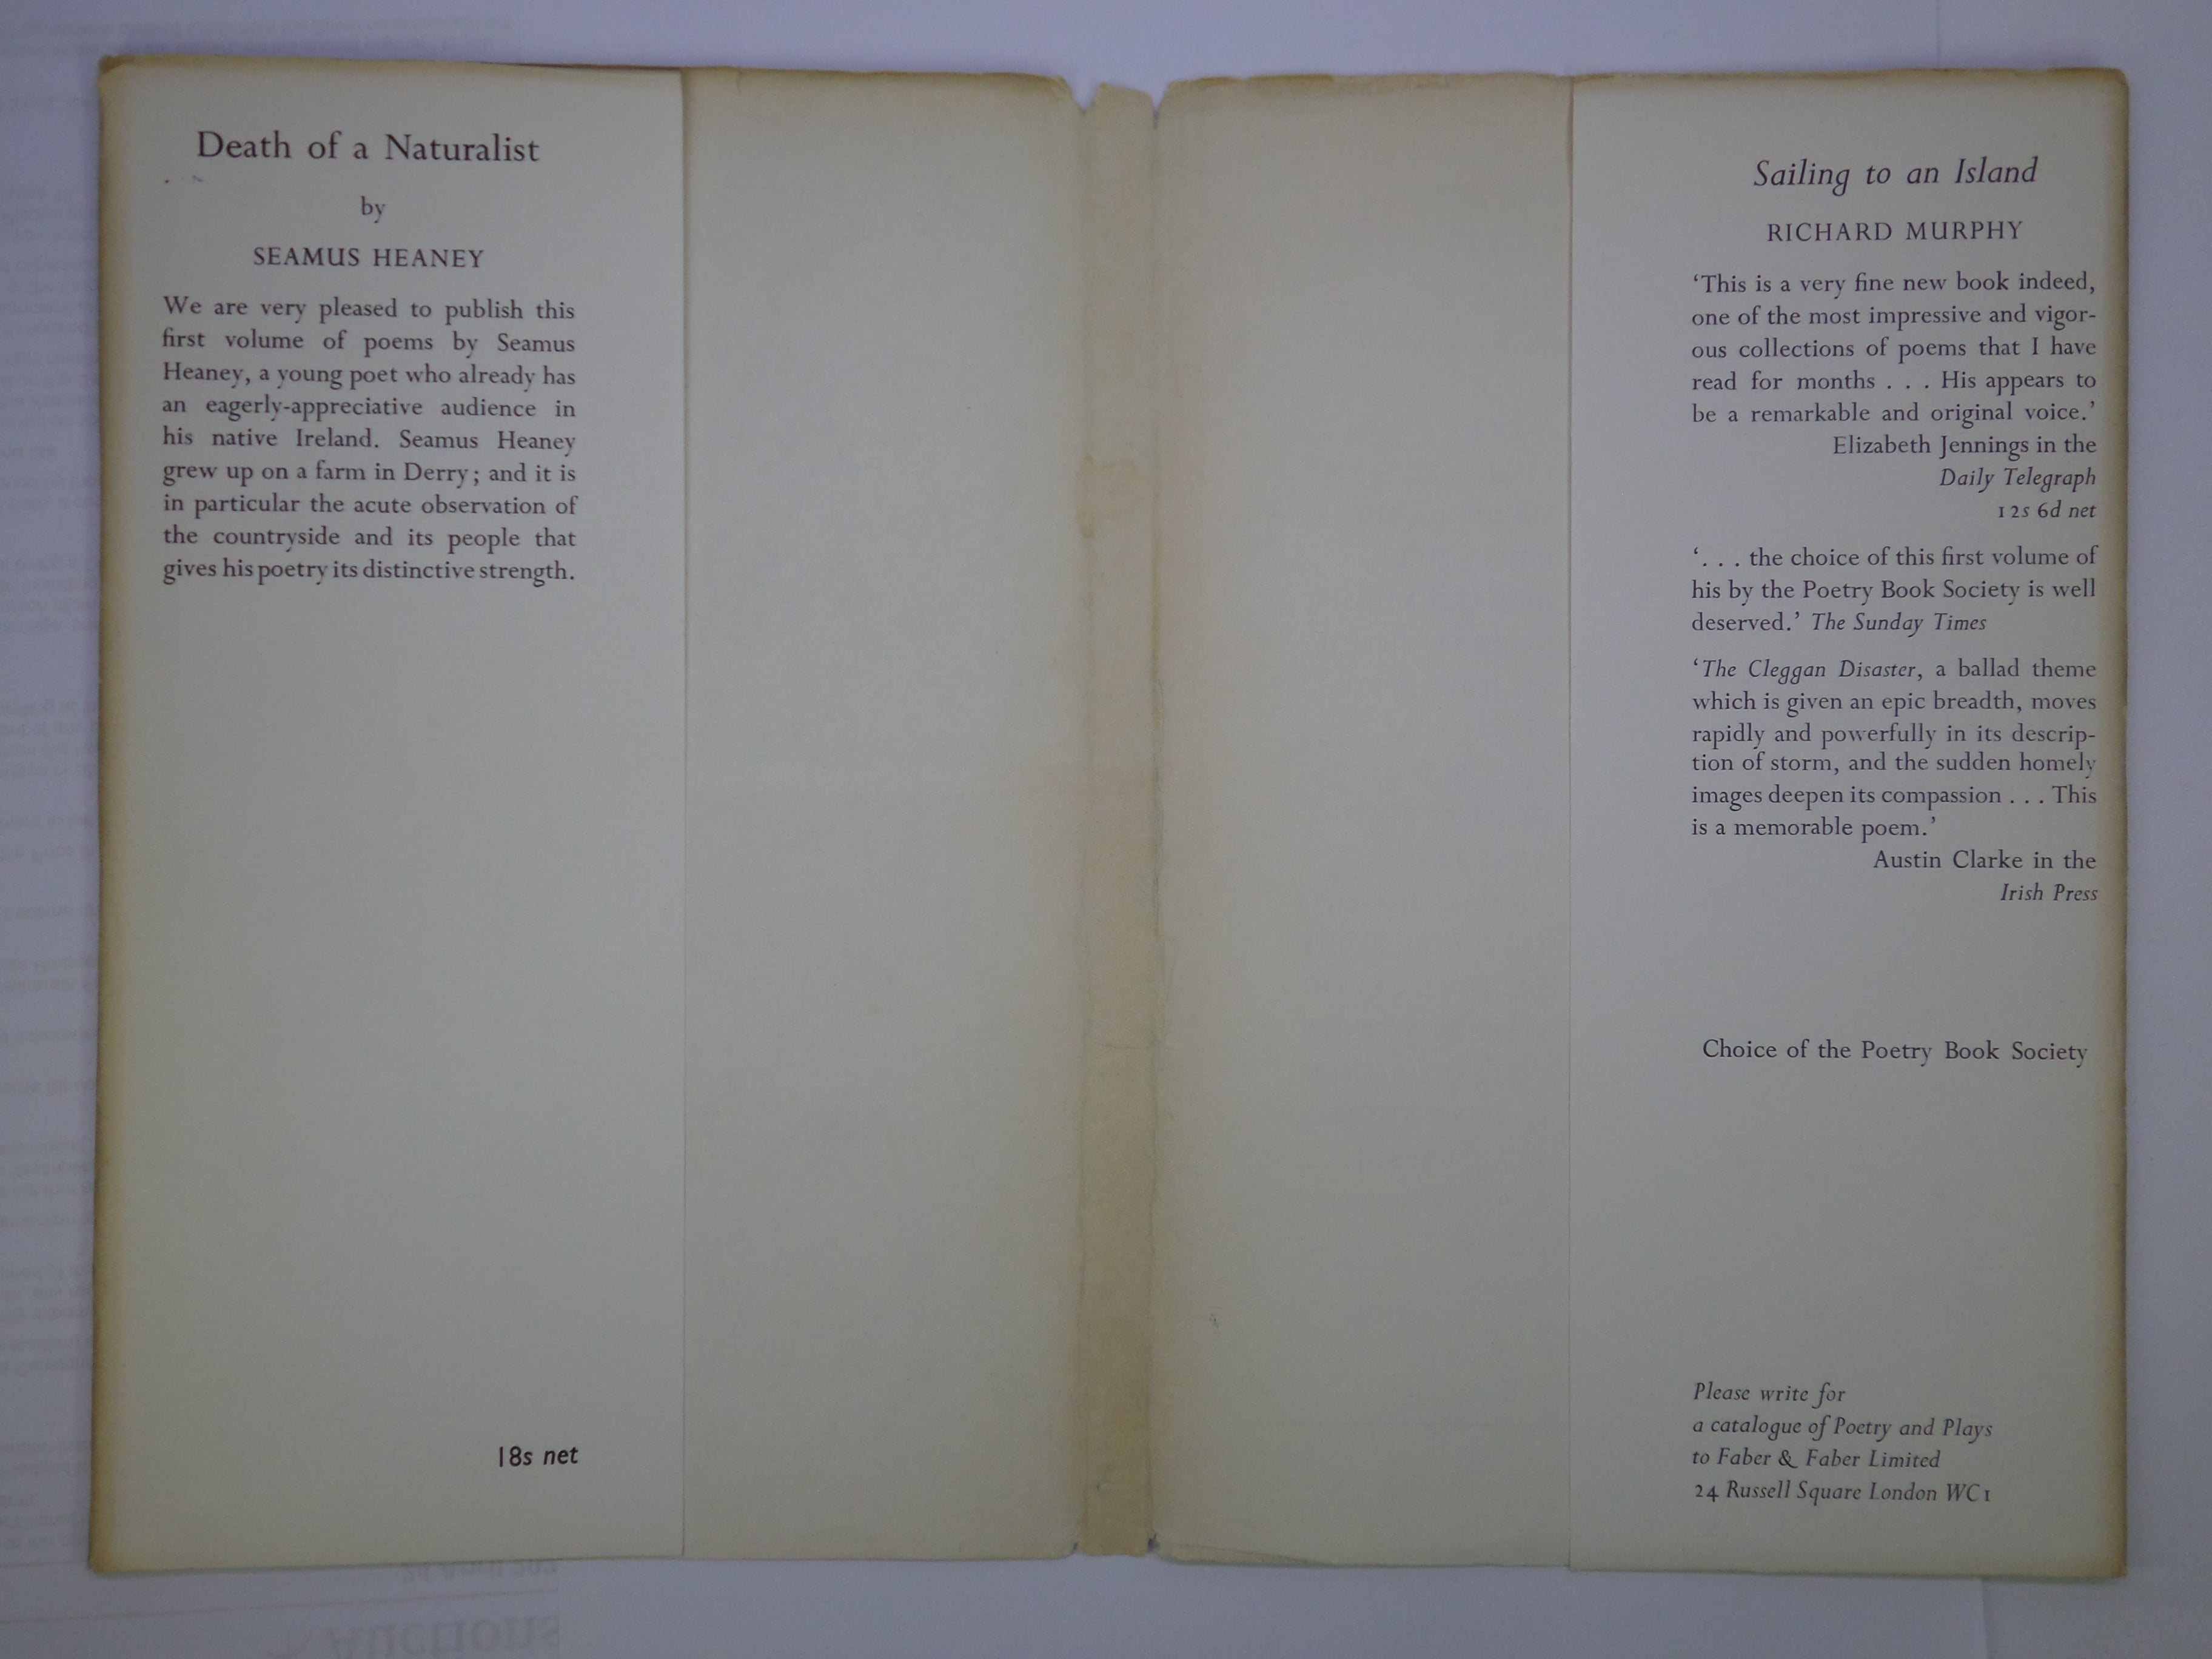 DEATH OF A NATURALIST BY SEAMUS HEANEY 1966 FIRST EDITION